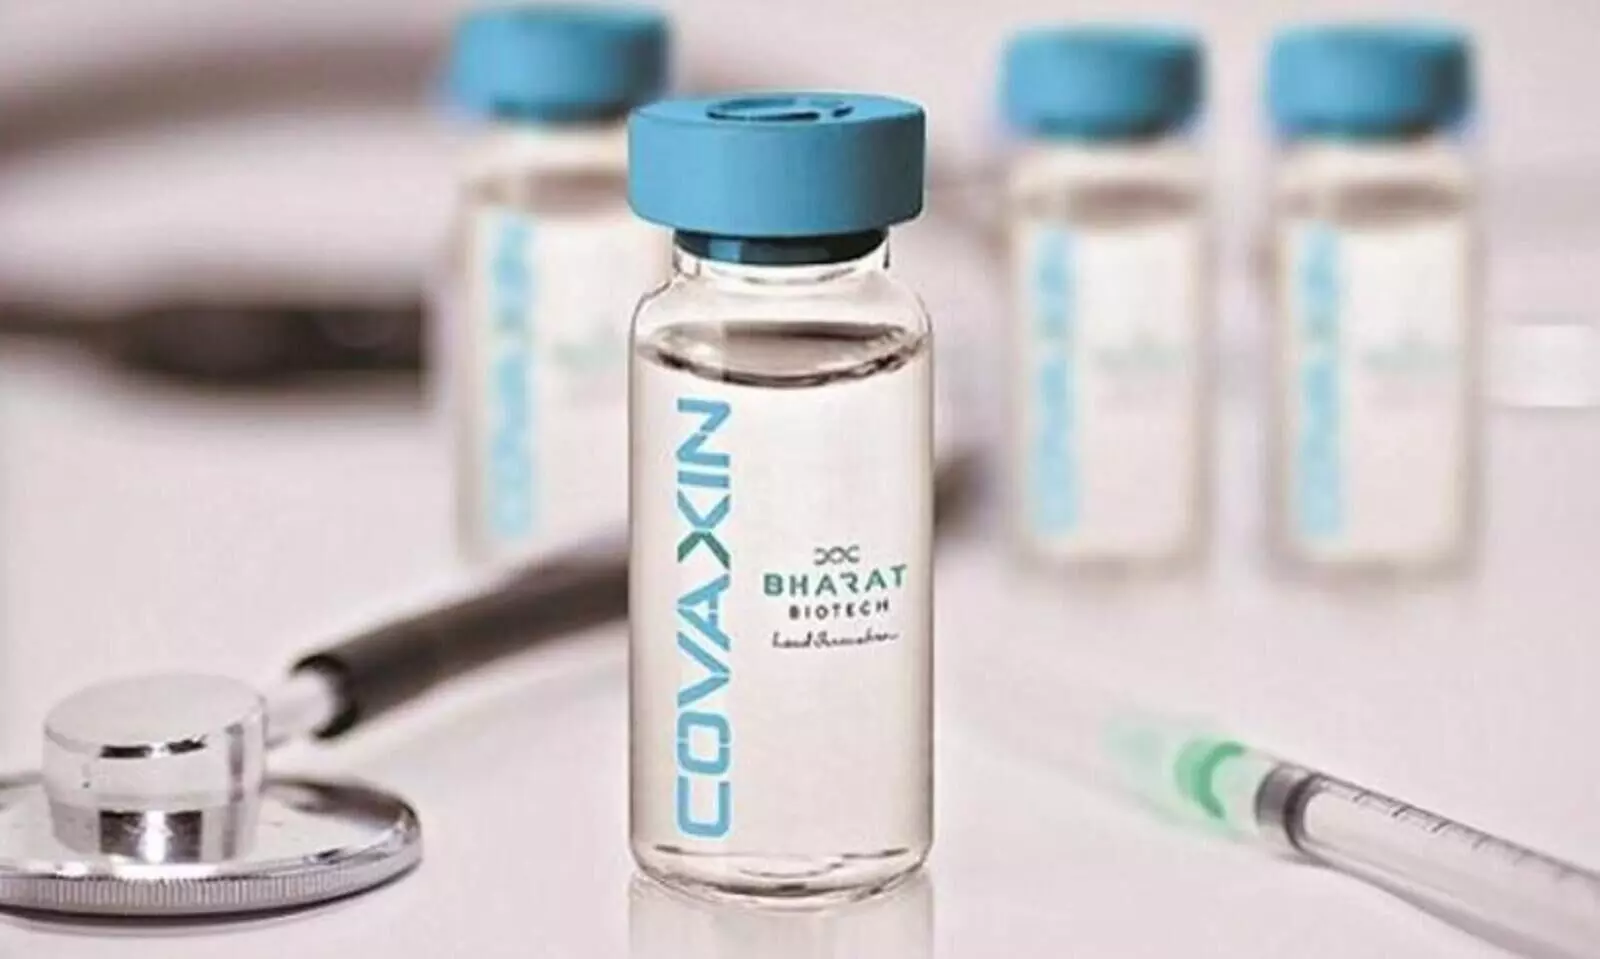 Covaxin gets DGCI approval for use in children above 12 years